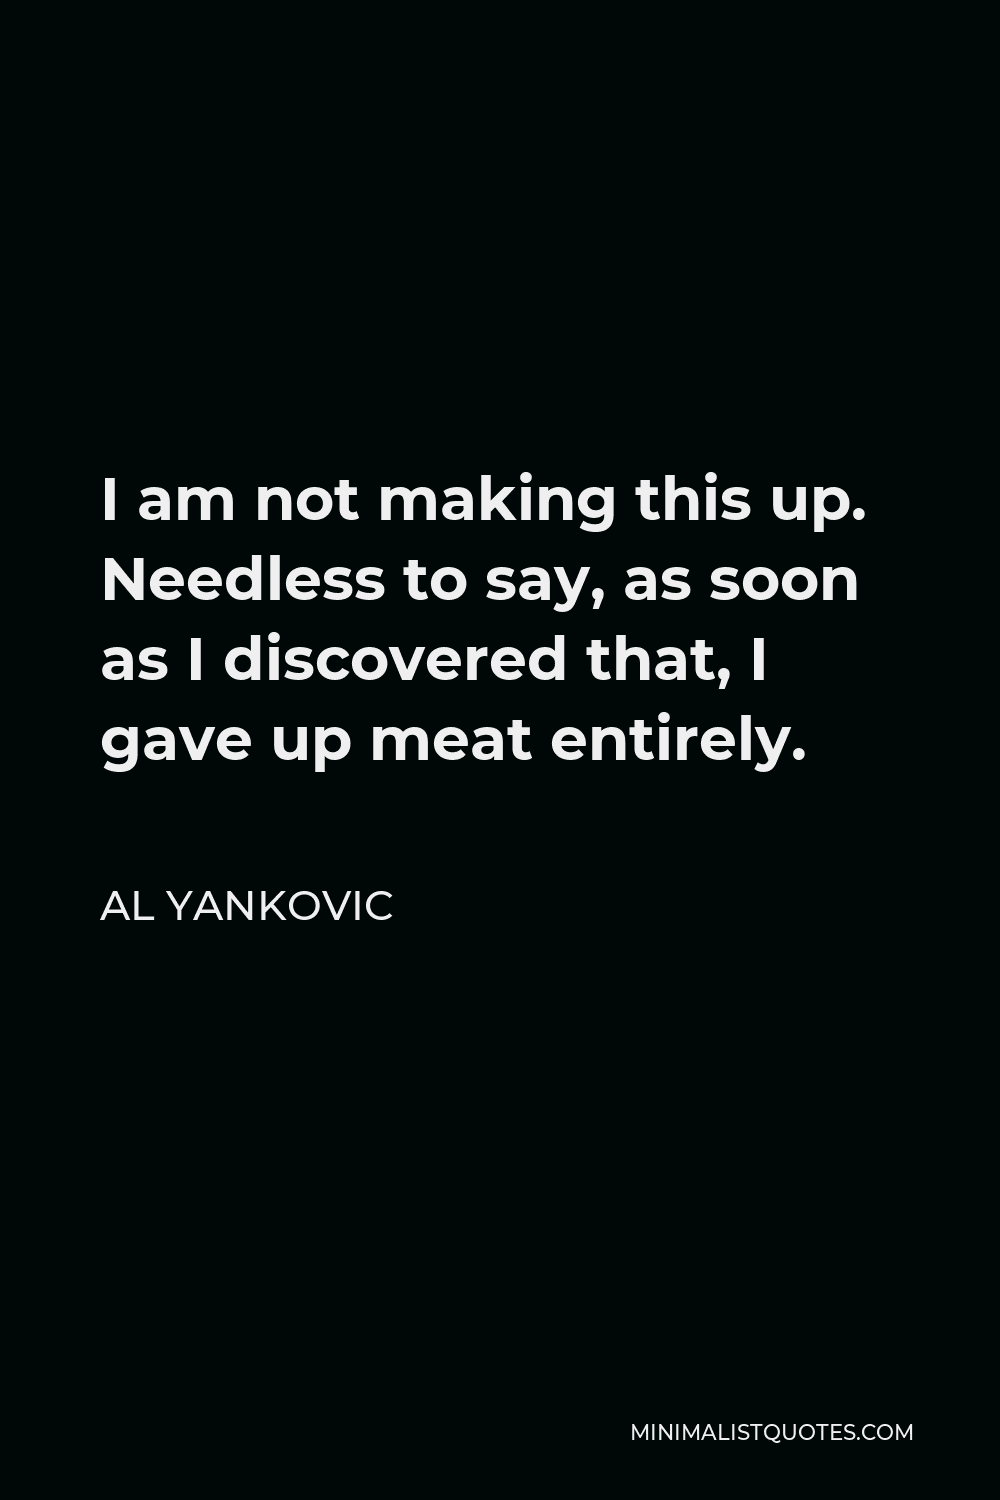 Al Yankovic Quote - I am not making this up. Needless to say, as soon as I discovered that, I gave up meat entirely.